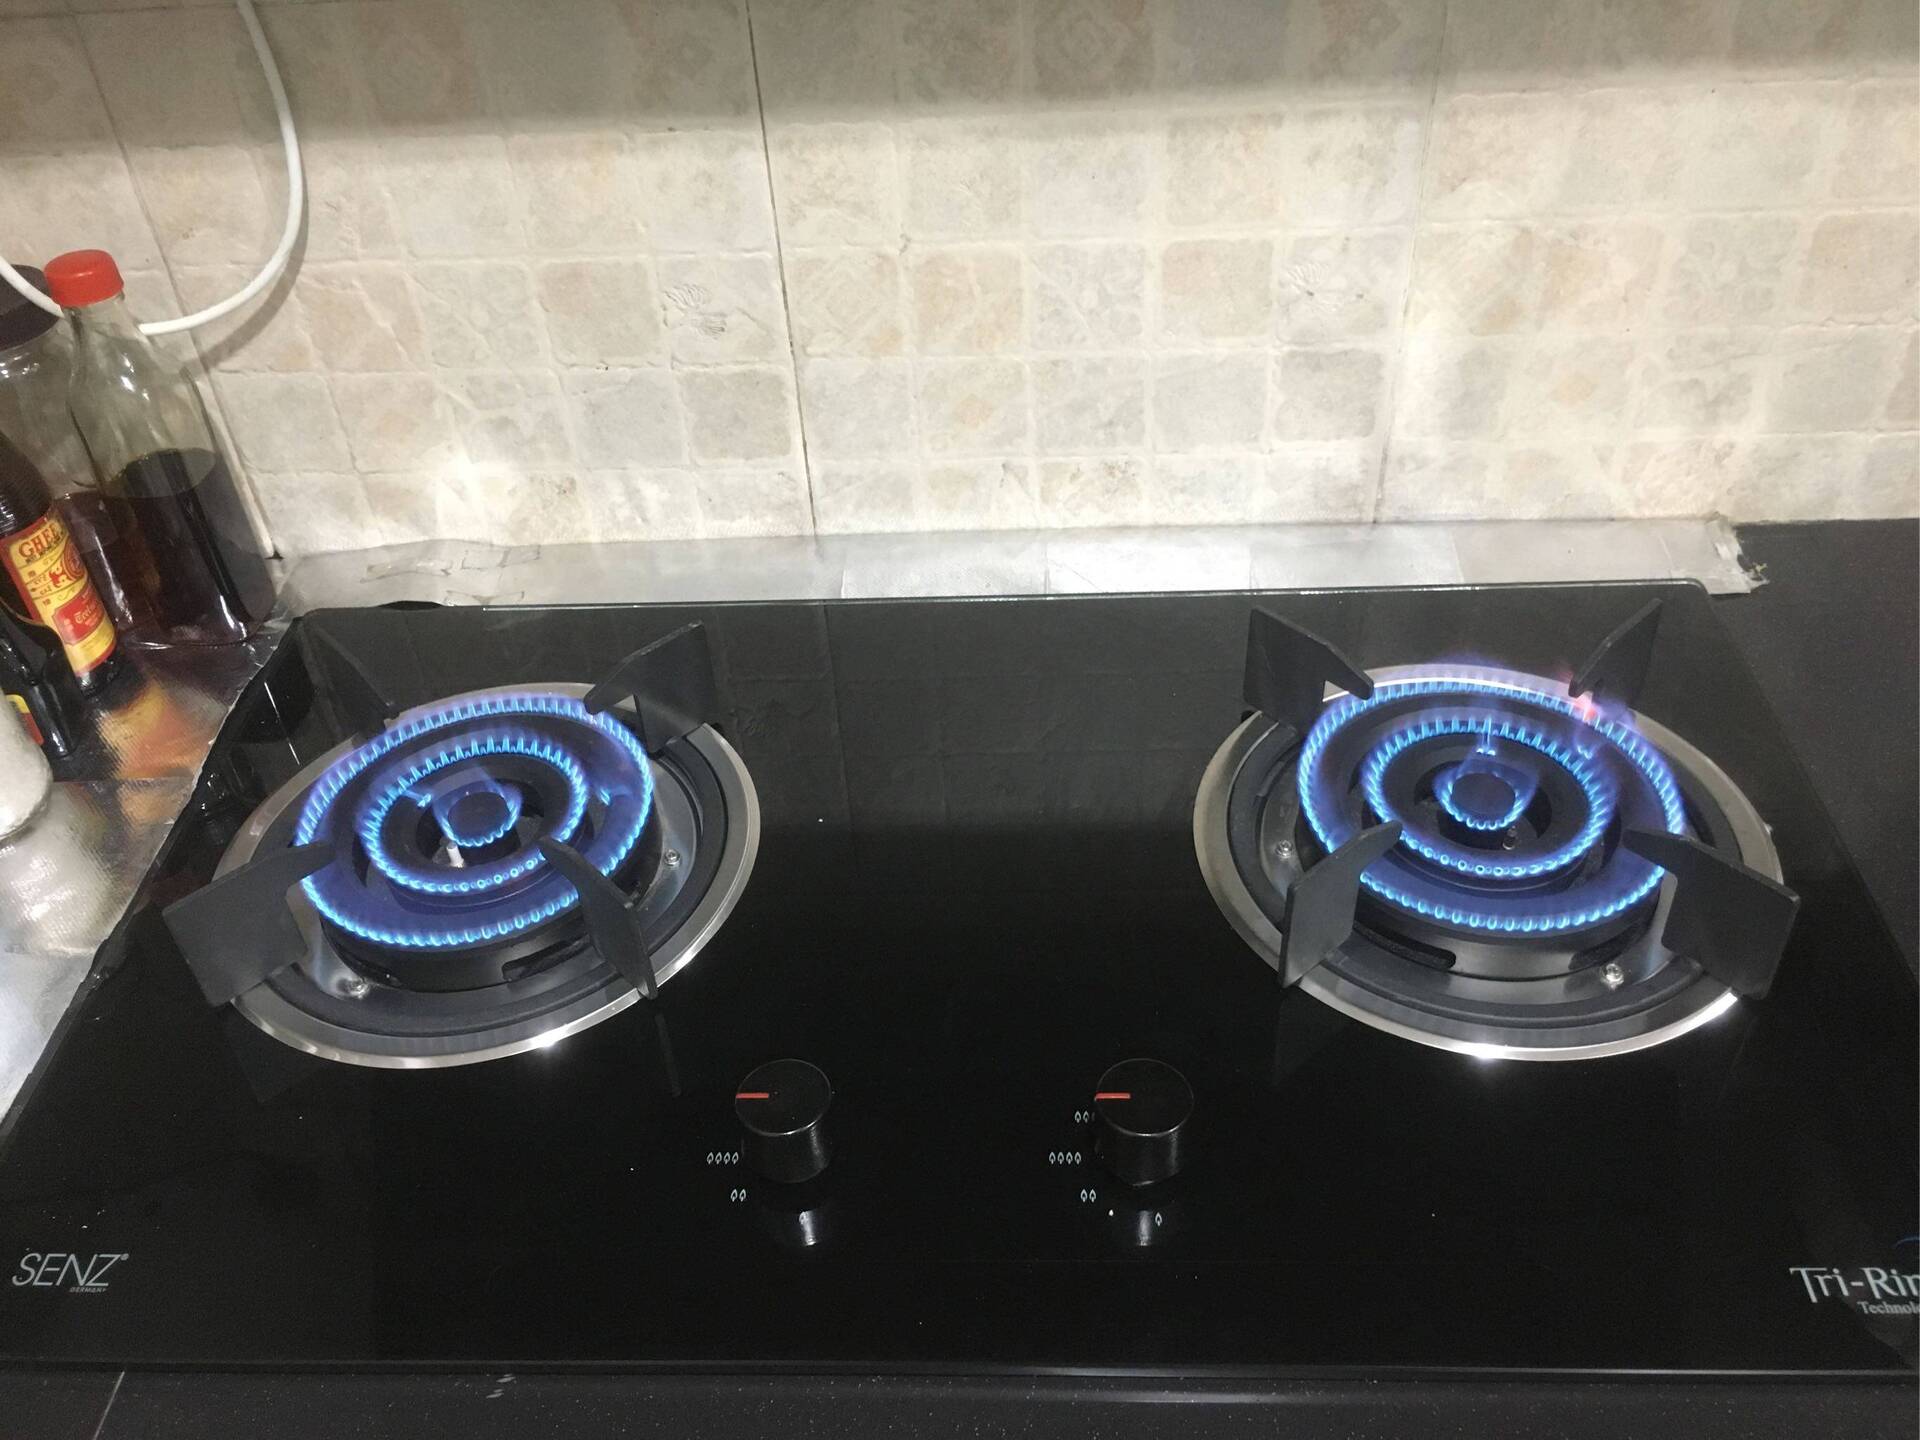 How To Distribute Heat Evenly Between 2 Stove Burners